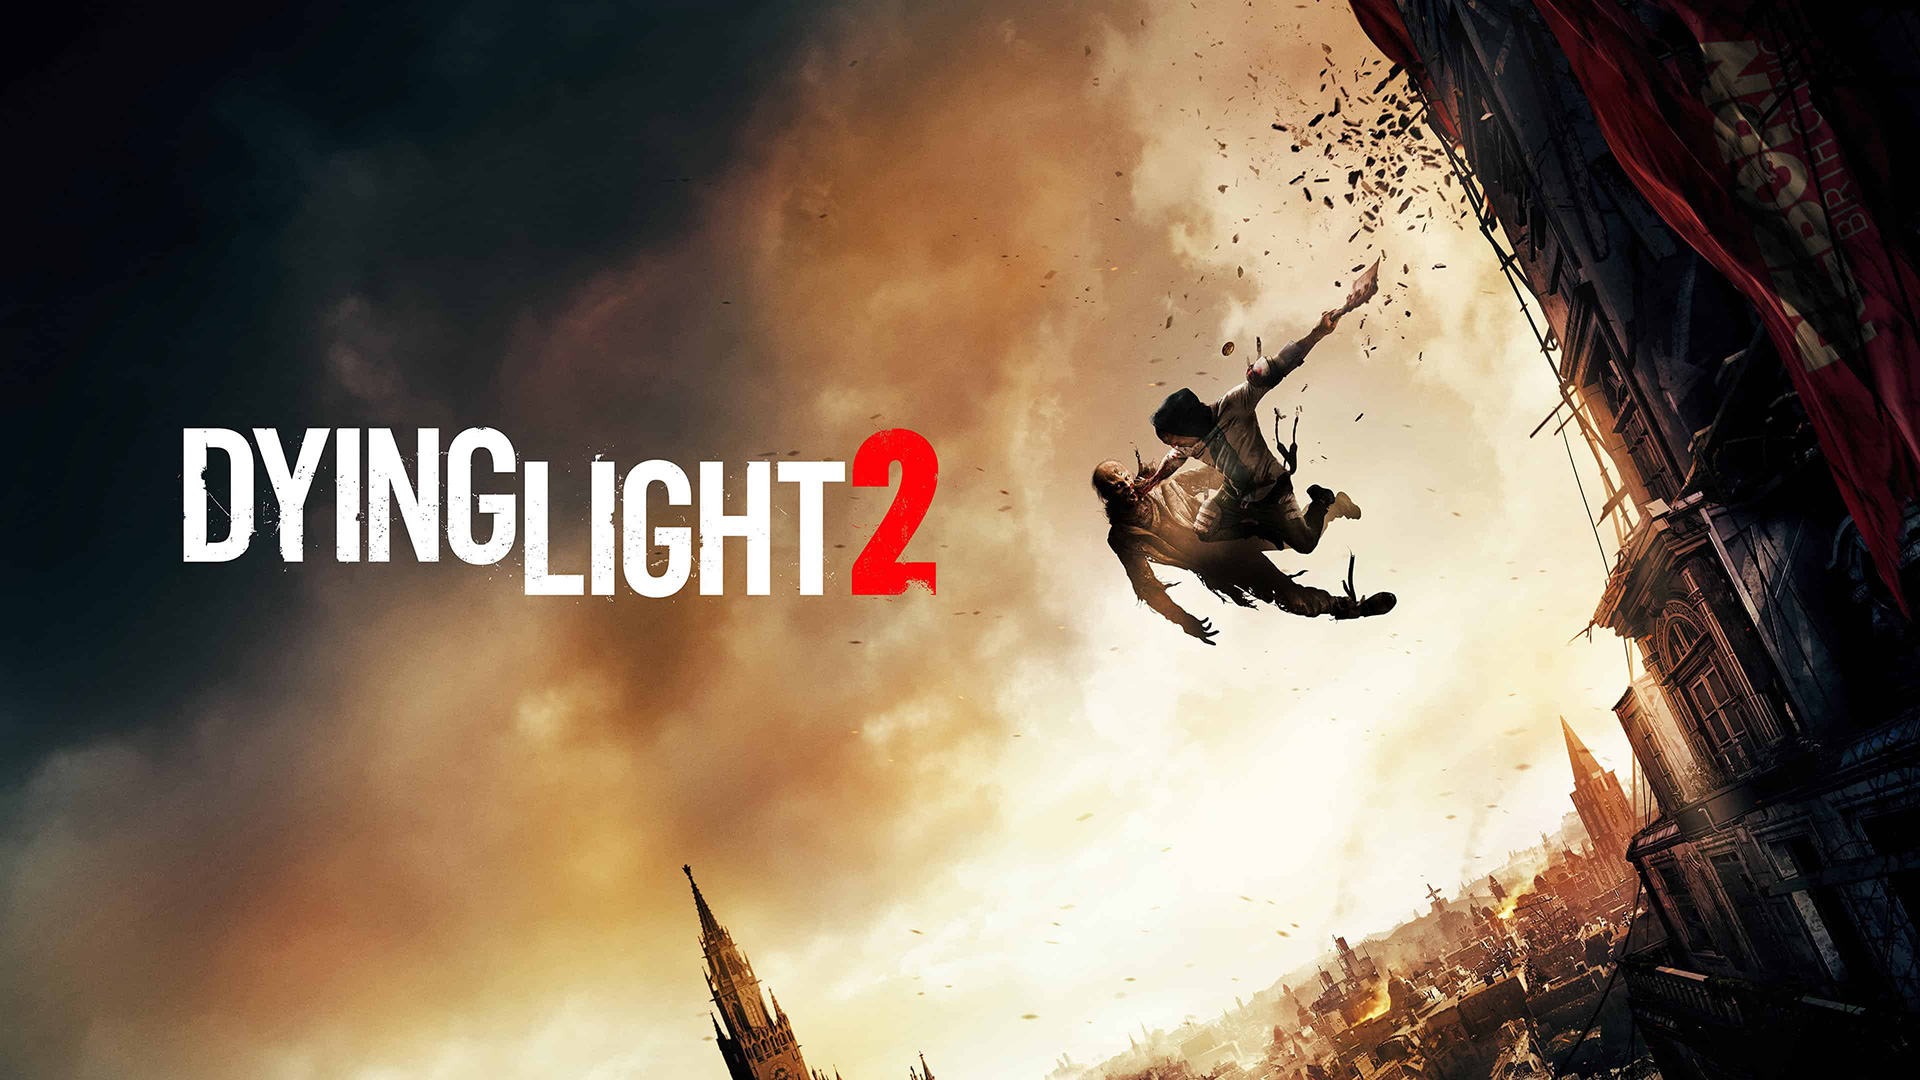 Dying Light 2 Stay Human Has Been Delayed To February 4, 2022 – Gameranx